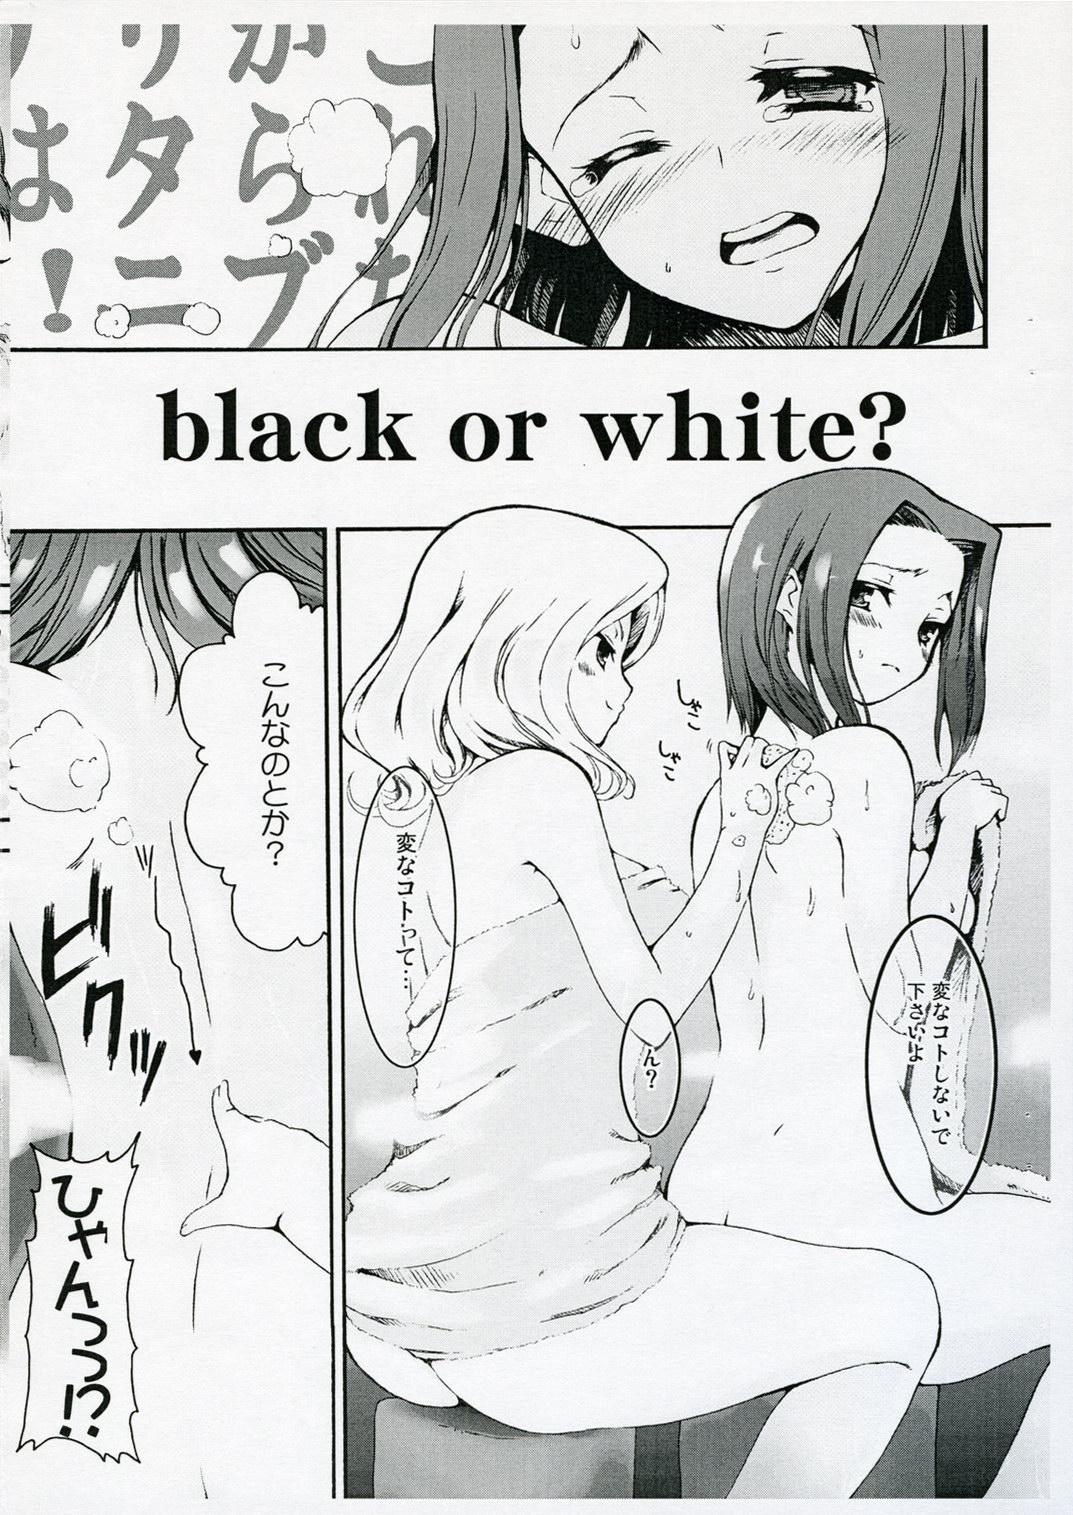 Asians black or white? - Code geass Letsdoeit - Page 4